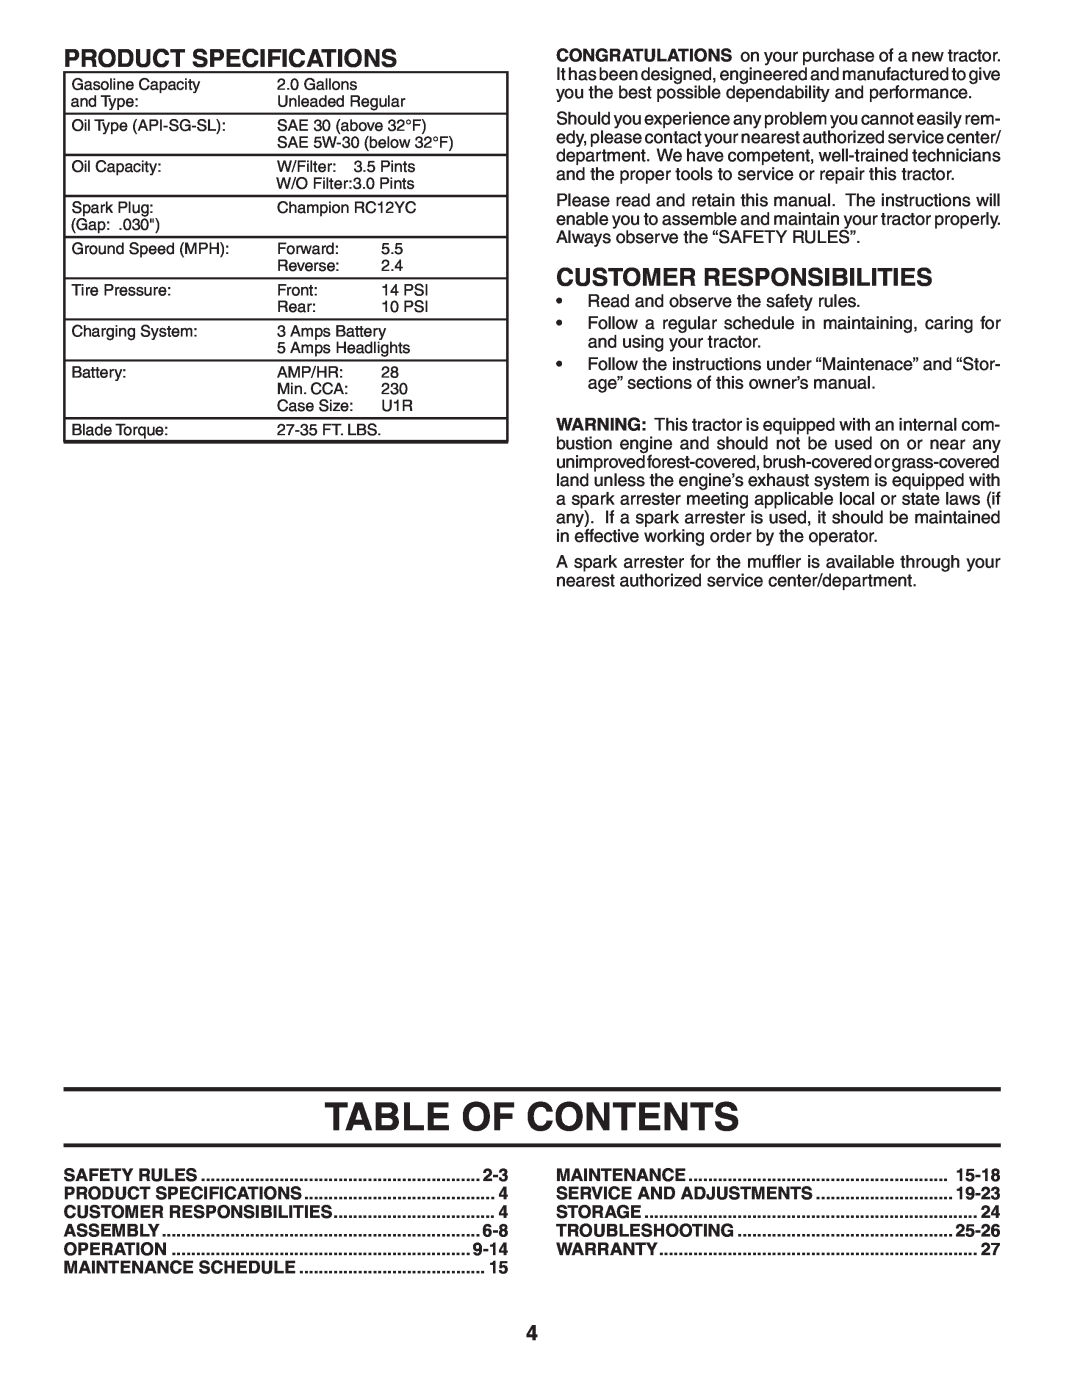 Poulan 194992 manual Table Of Contents, Product Specifications, Customer Responsibilities, 9-14, 15-18, 19-23, 25-26 